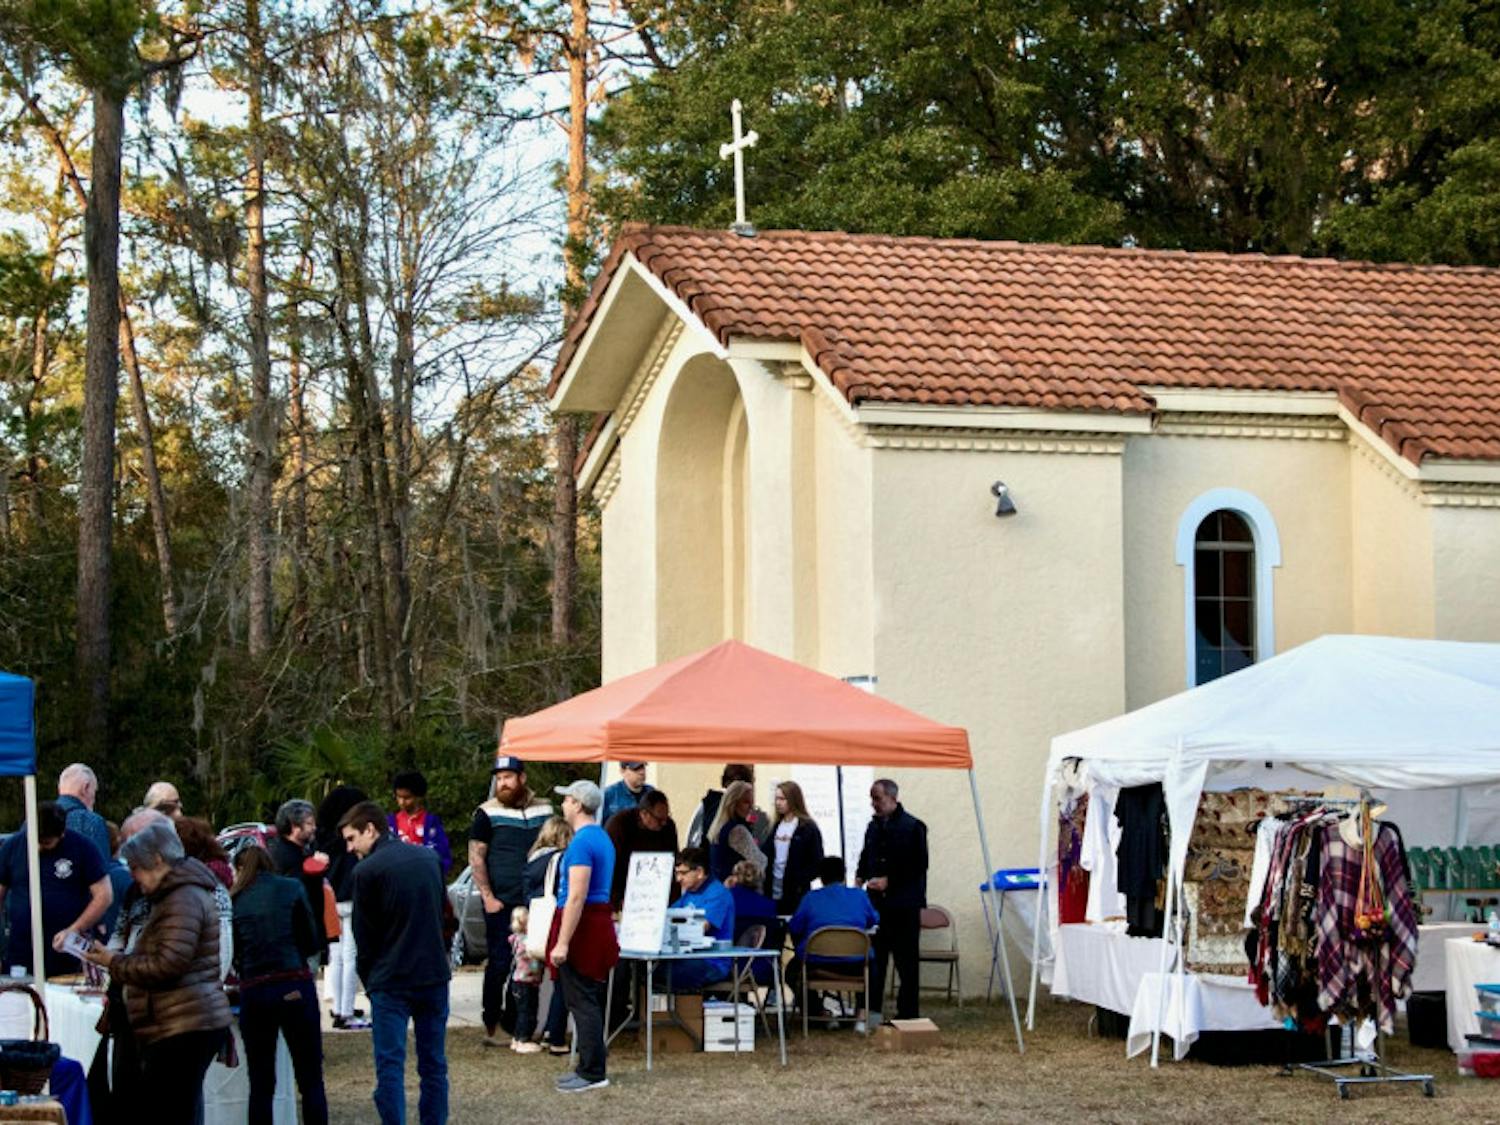 Crowds gather to get tickets for the first Gainesville Greek Festival at St. Elizabeth Greek Orthodox Church on Friday night.
&nbsp;